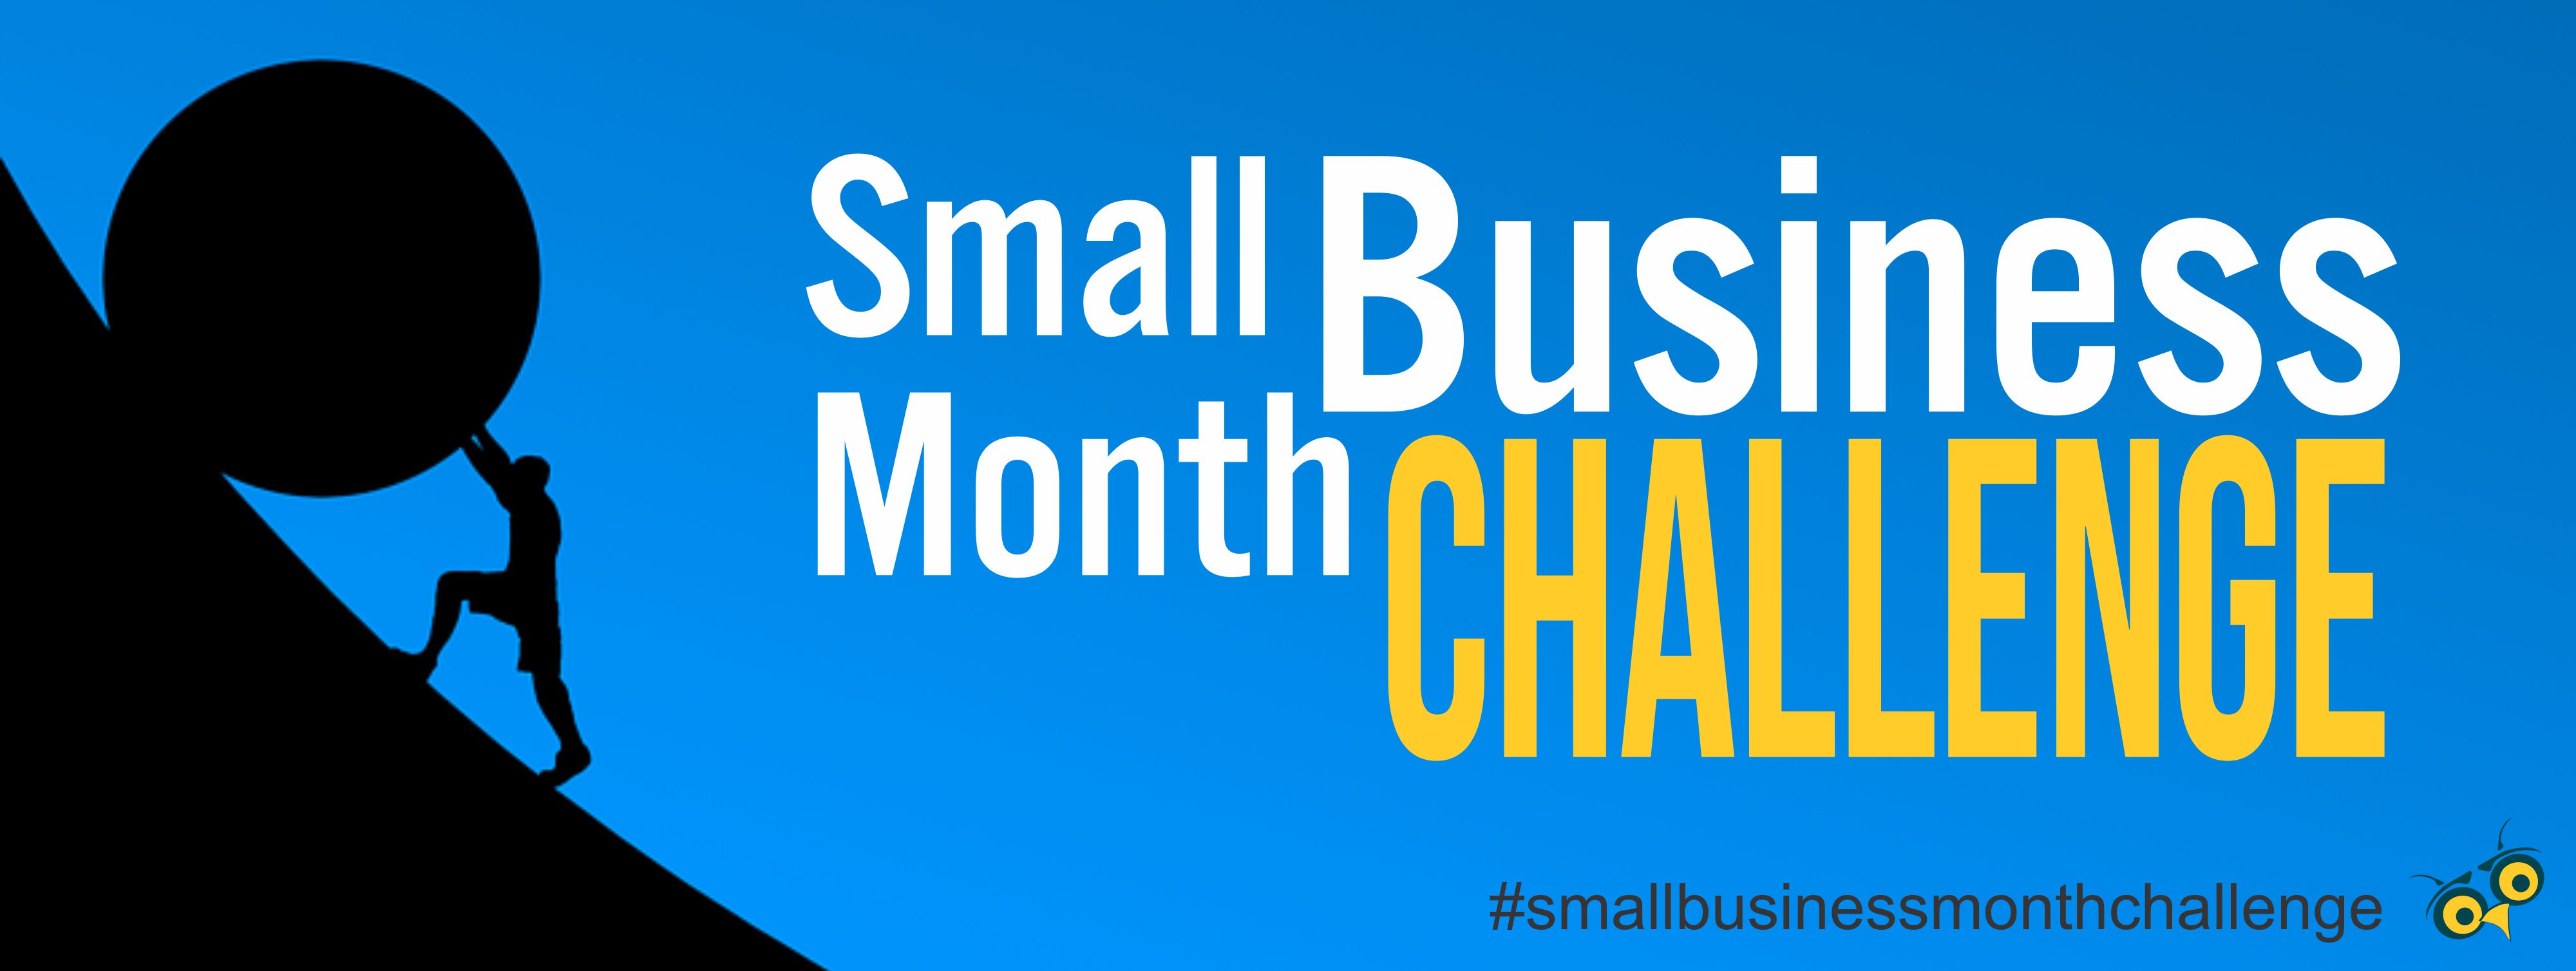 small business month challenge